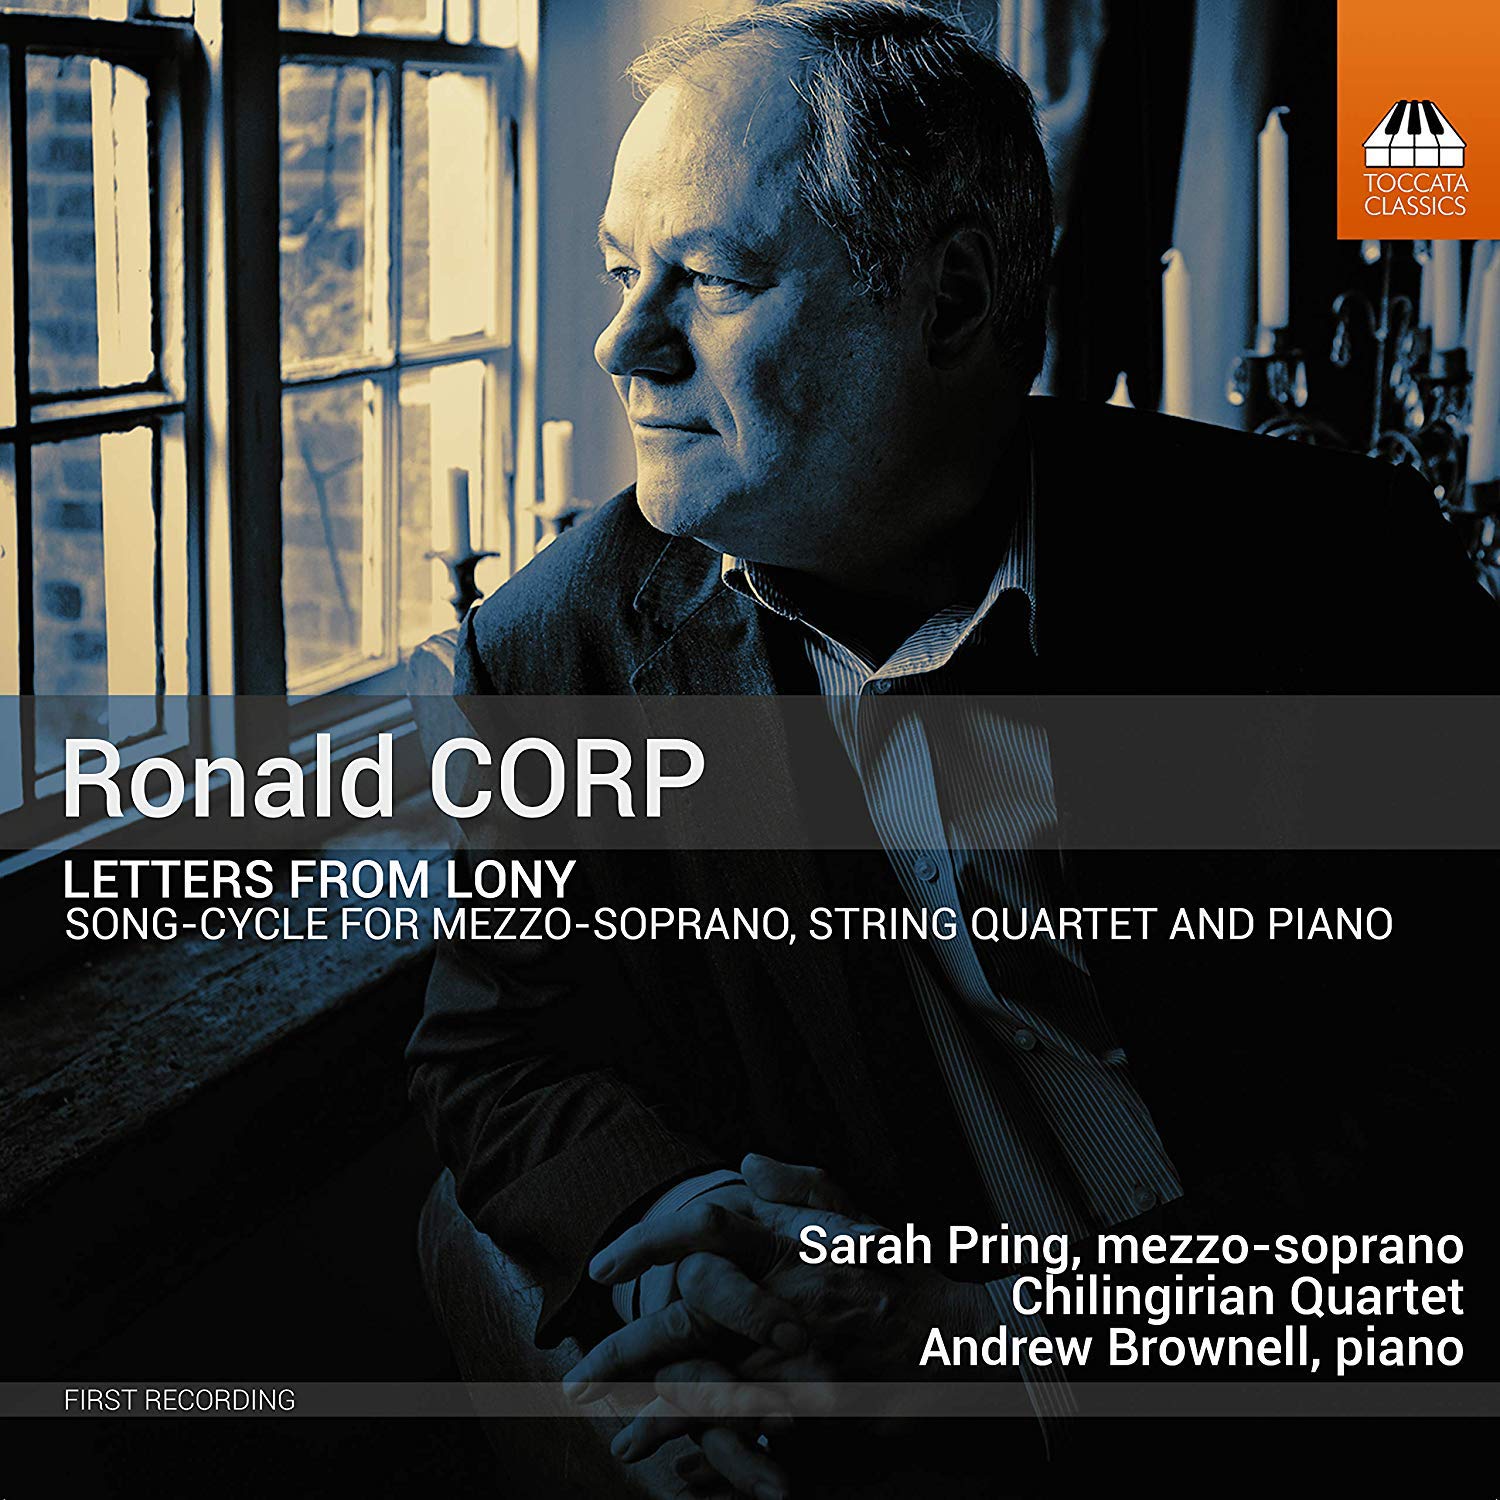 Andrew Brownell, Chilingirian Quartet, Sarah Pring – Ronald Corp: Letters from Lony (2019) [FLAC 24bit/96kHz]